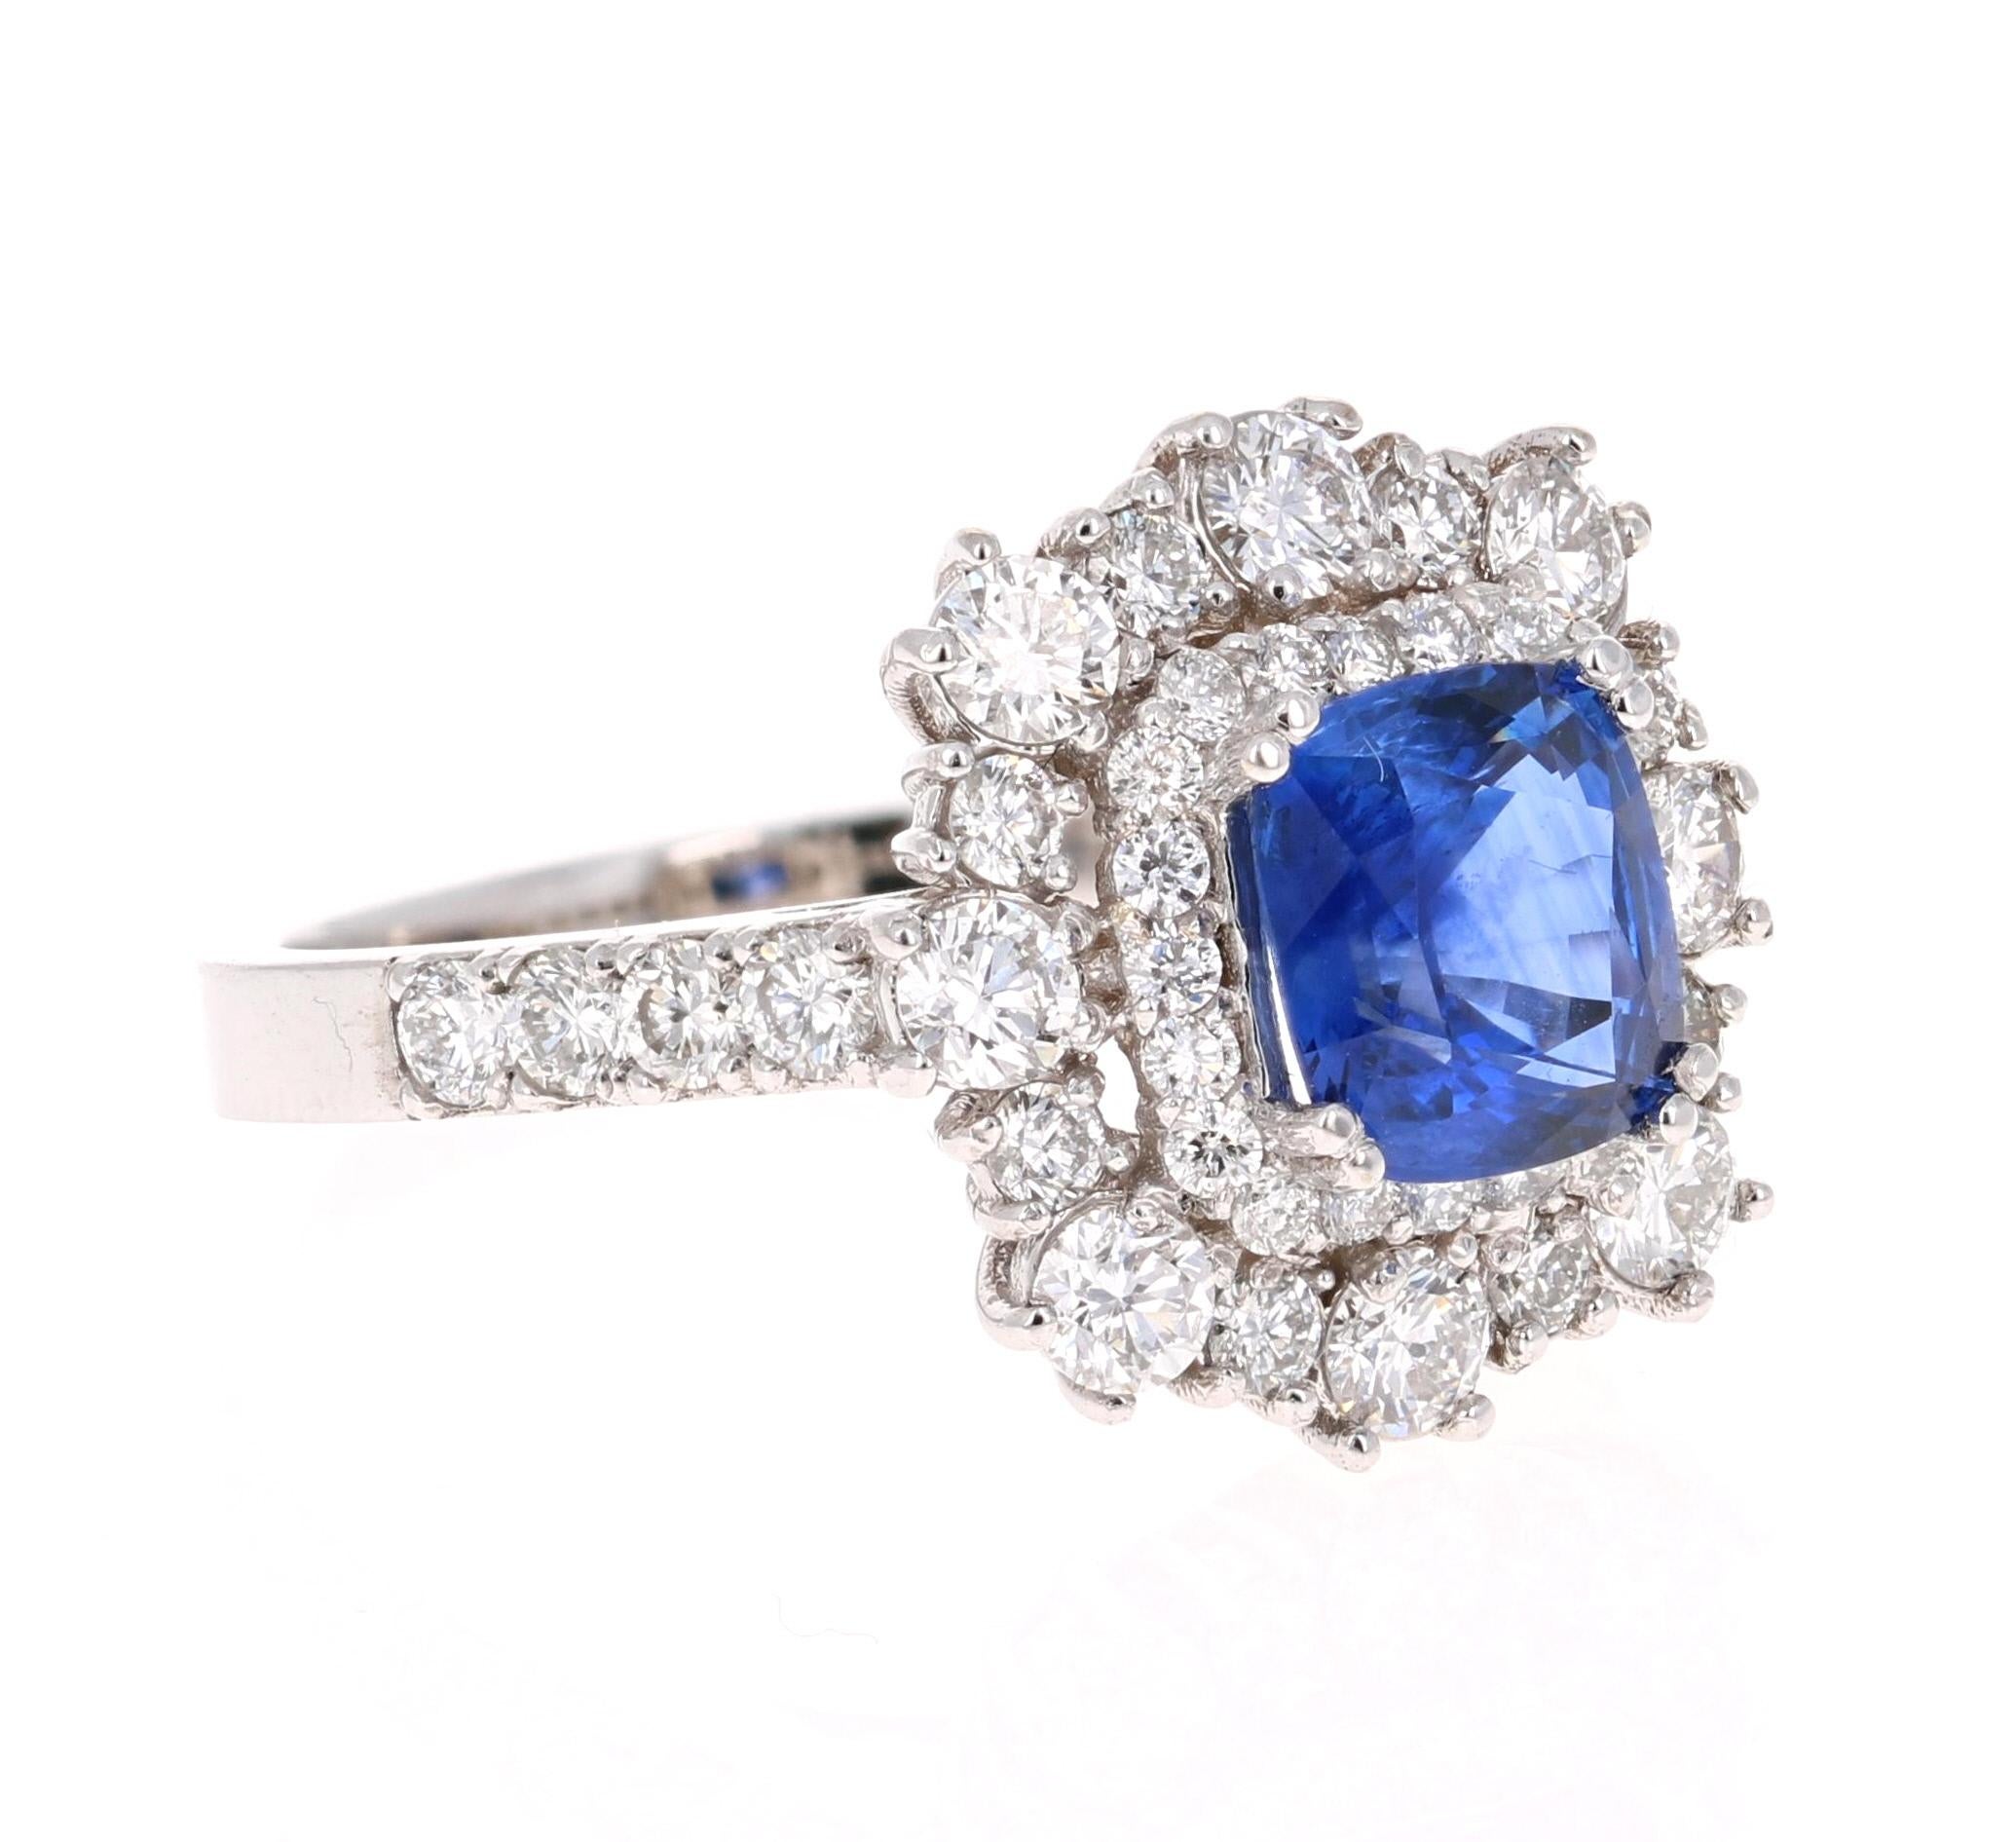 Beautiful Sapphire Diamond ring with an intricate setting! 

This ring has a Blue Sapphire that weighs 1.78 Carats and is GIA Certified. The Sapphire is a natural Blue Cushion Cut with indications of heating. The GIA Certificate Number is: